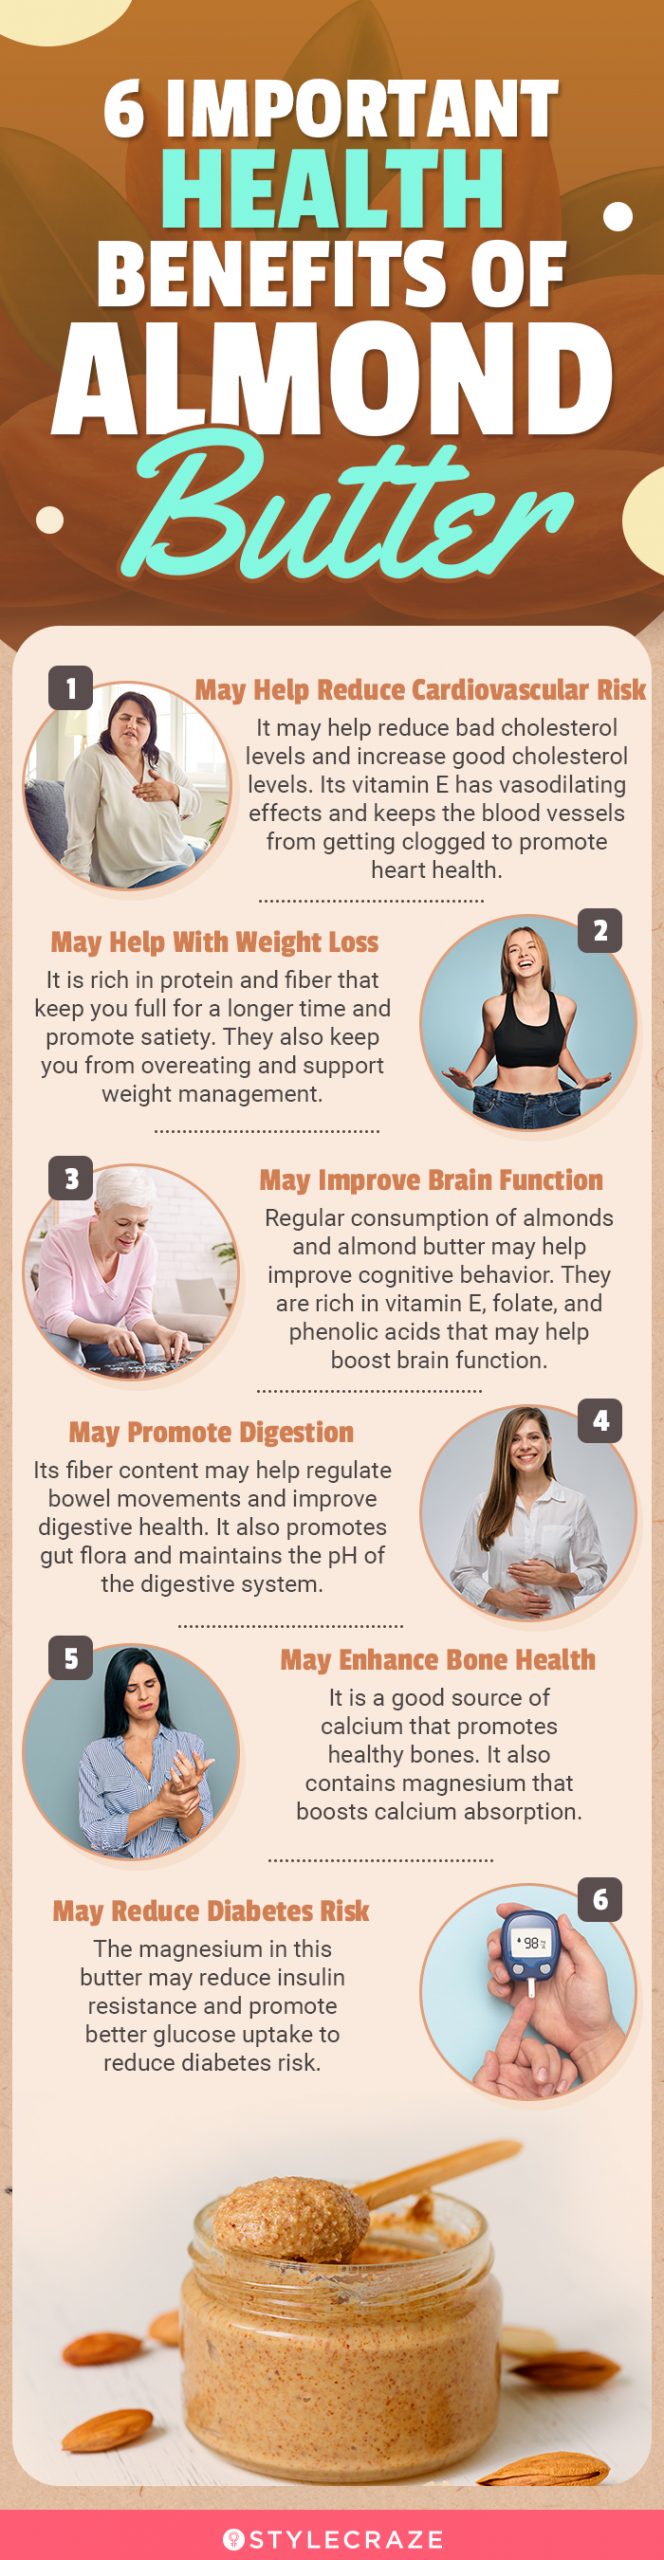 6 important health benefits of almond butter(infographic)